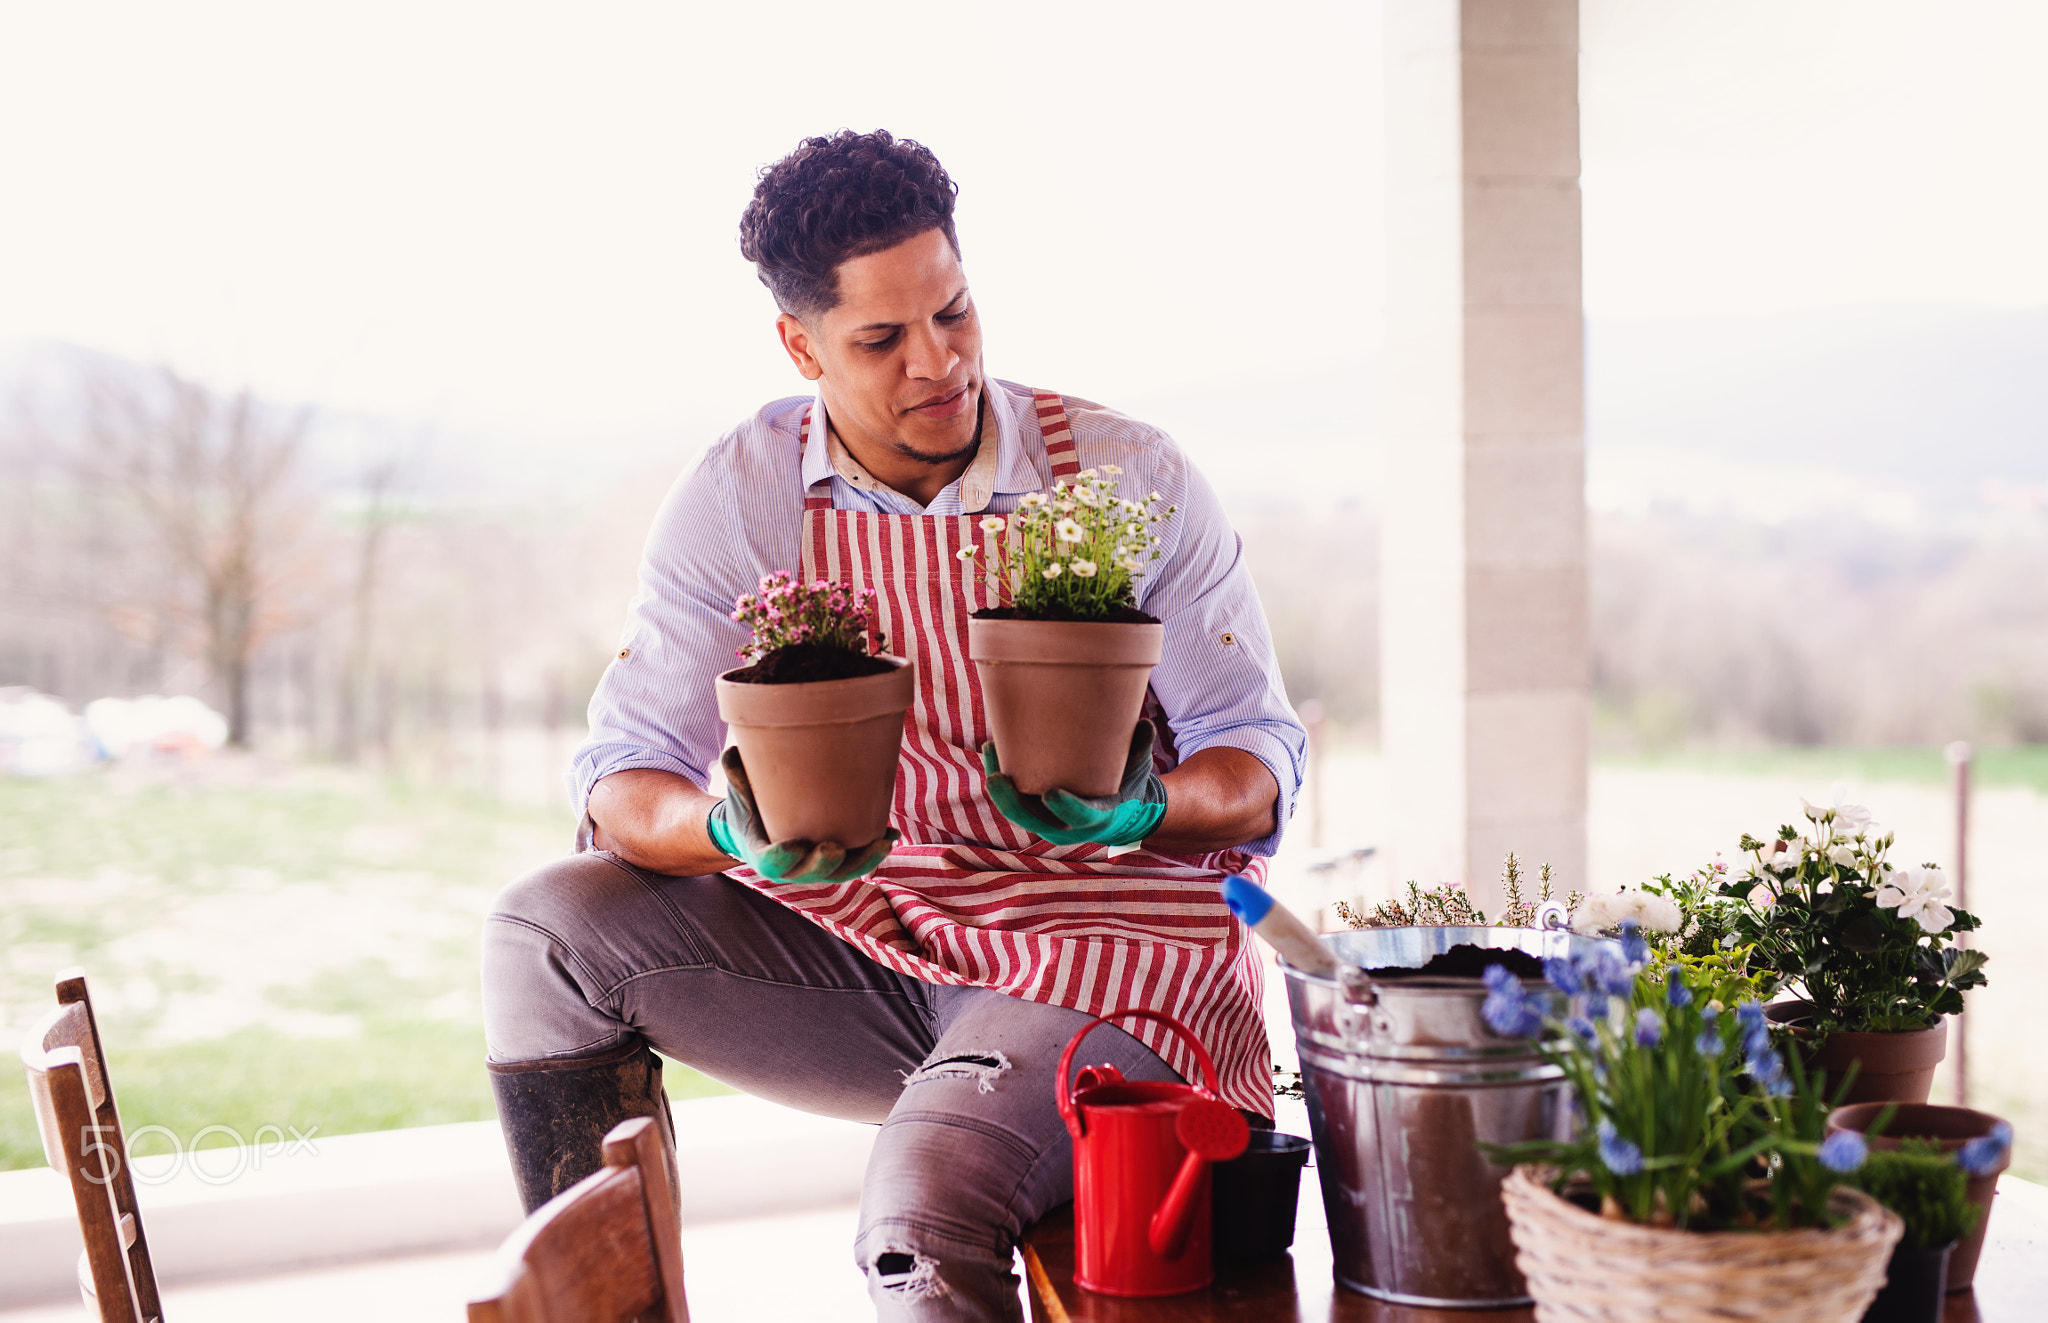 A portrait of young man gardener indoors at home, planting flowers.